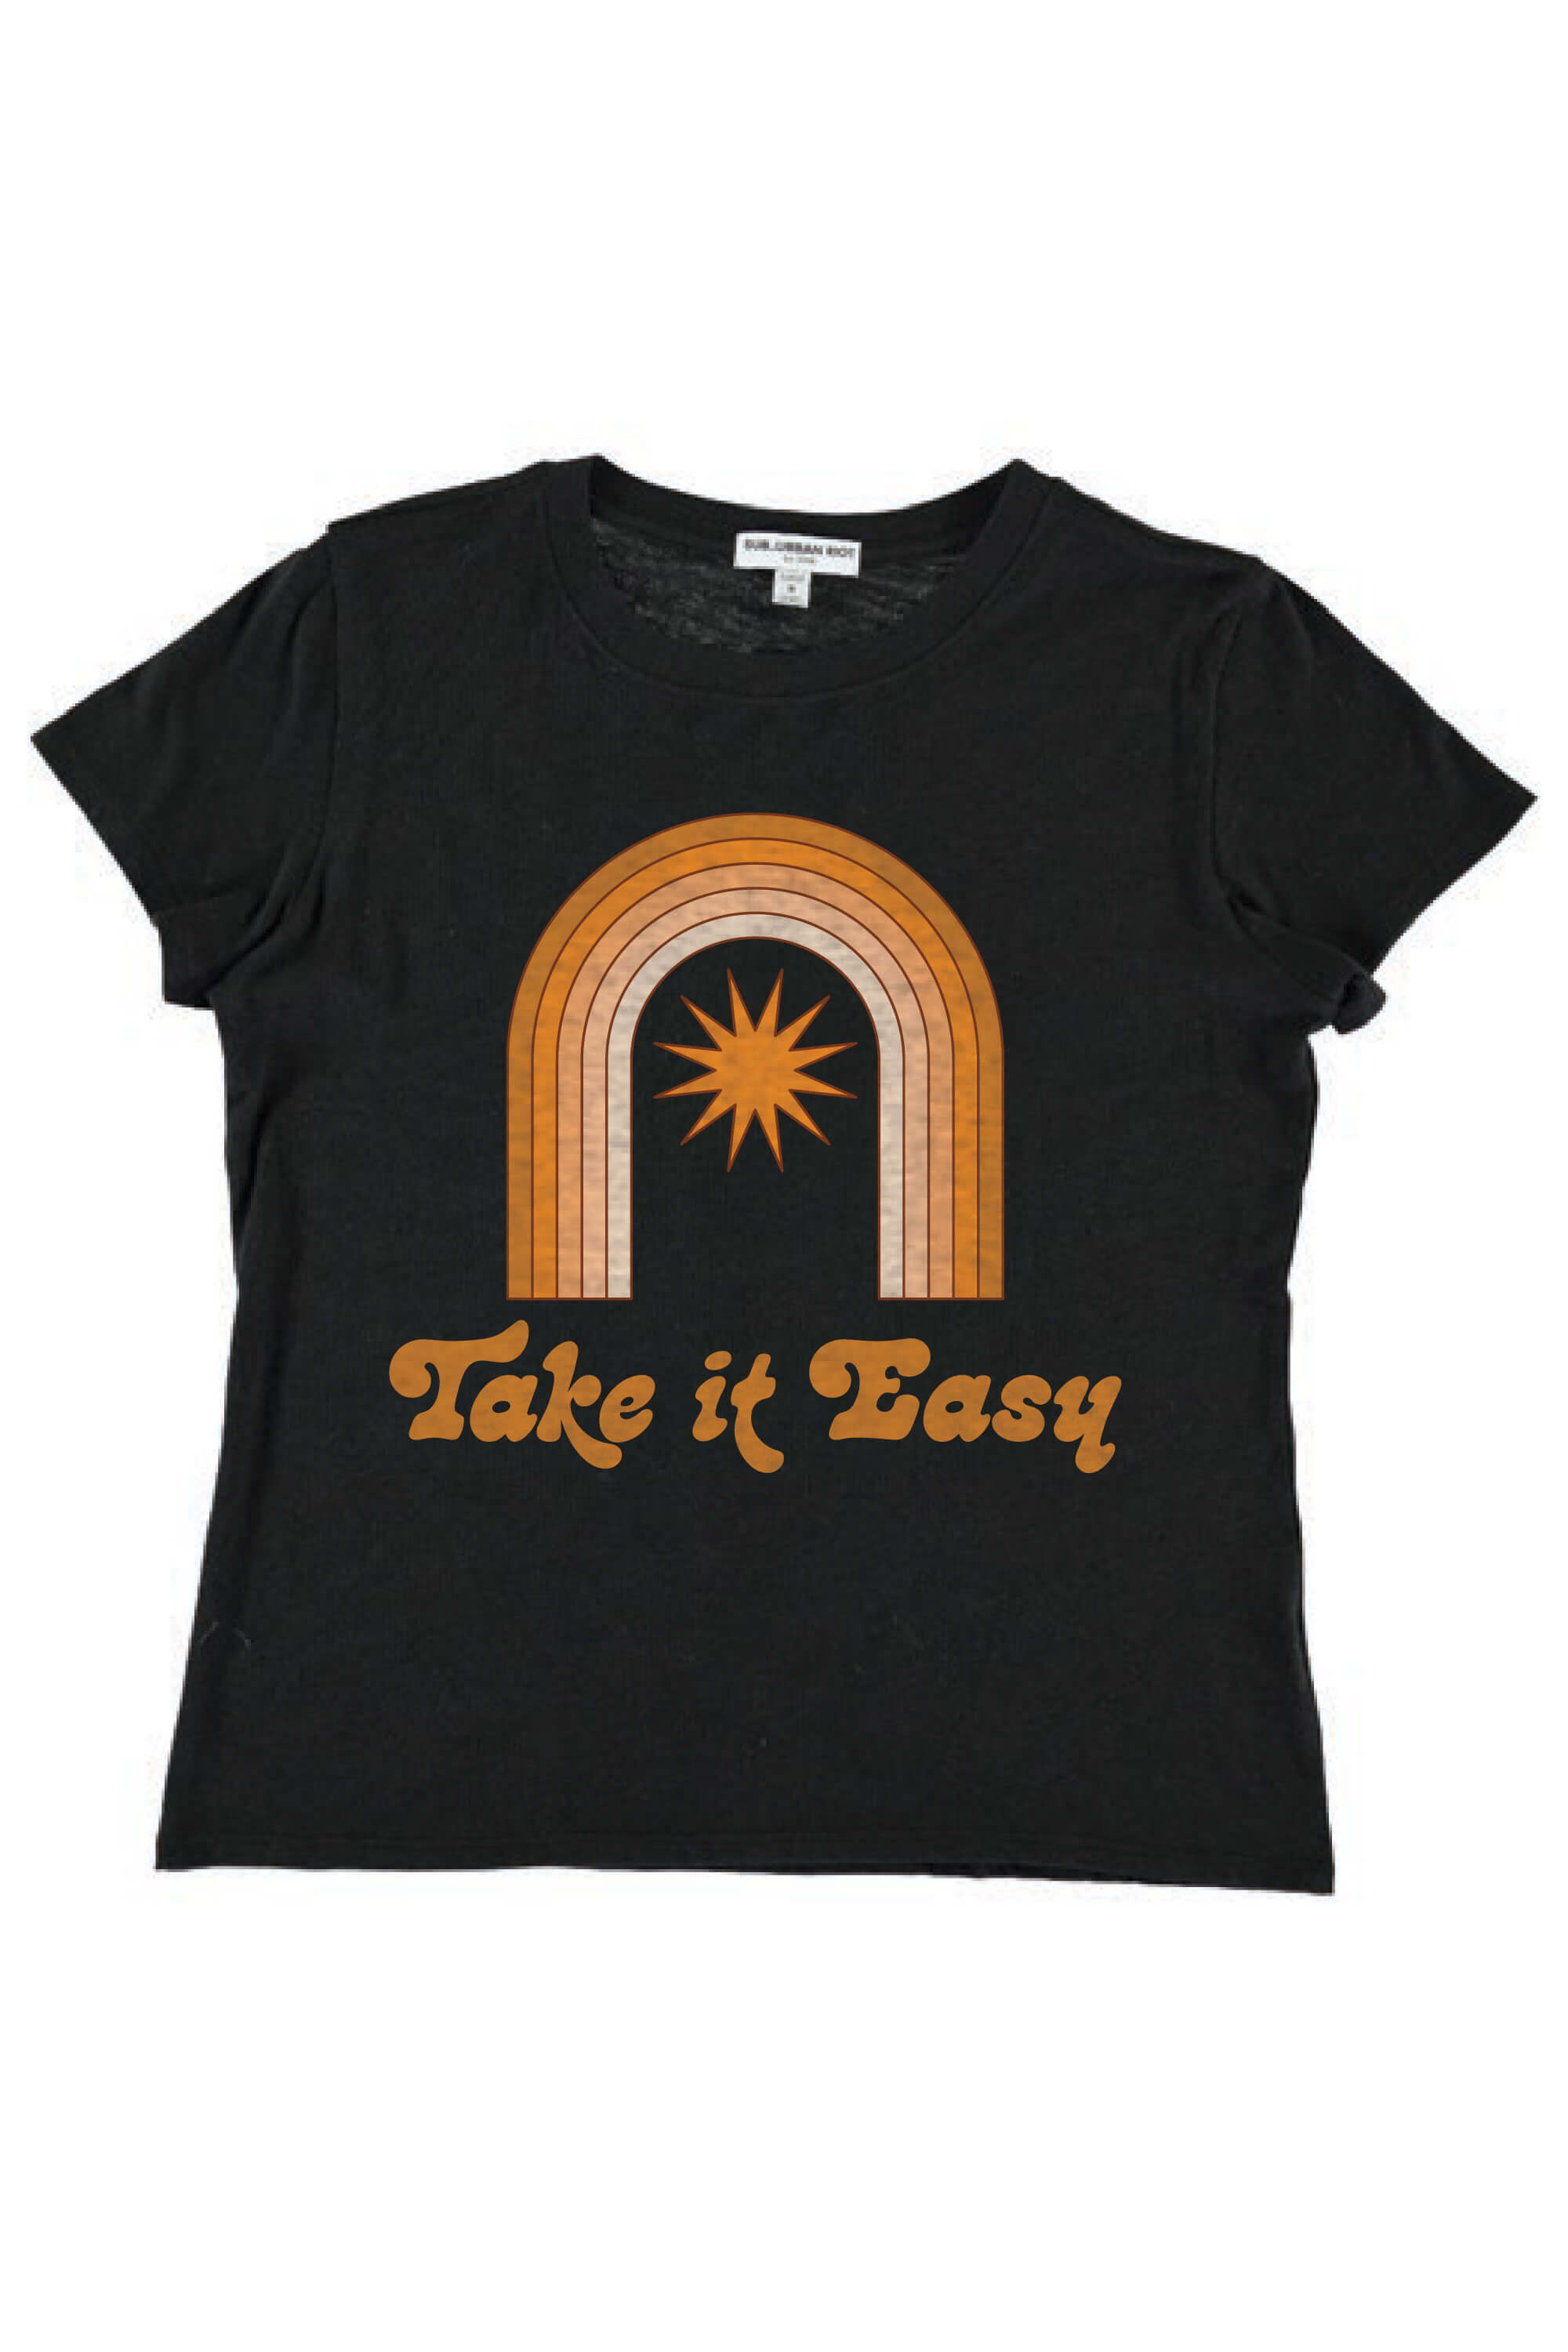 TAKE IT EASY NEW YOUTH SIZE LOOSE TEE